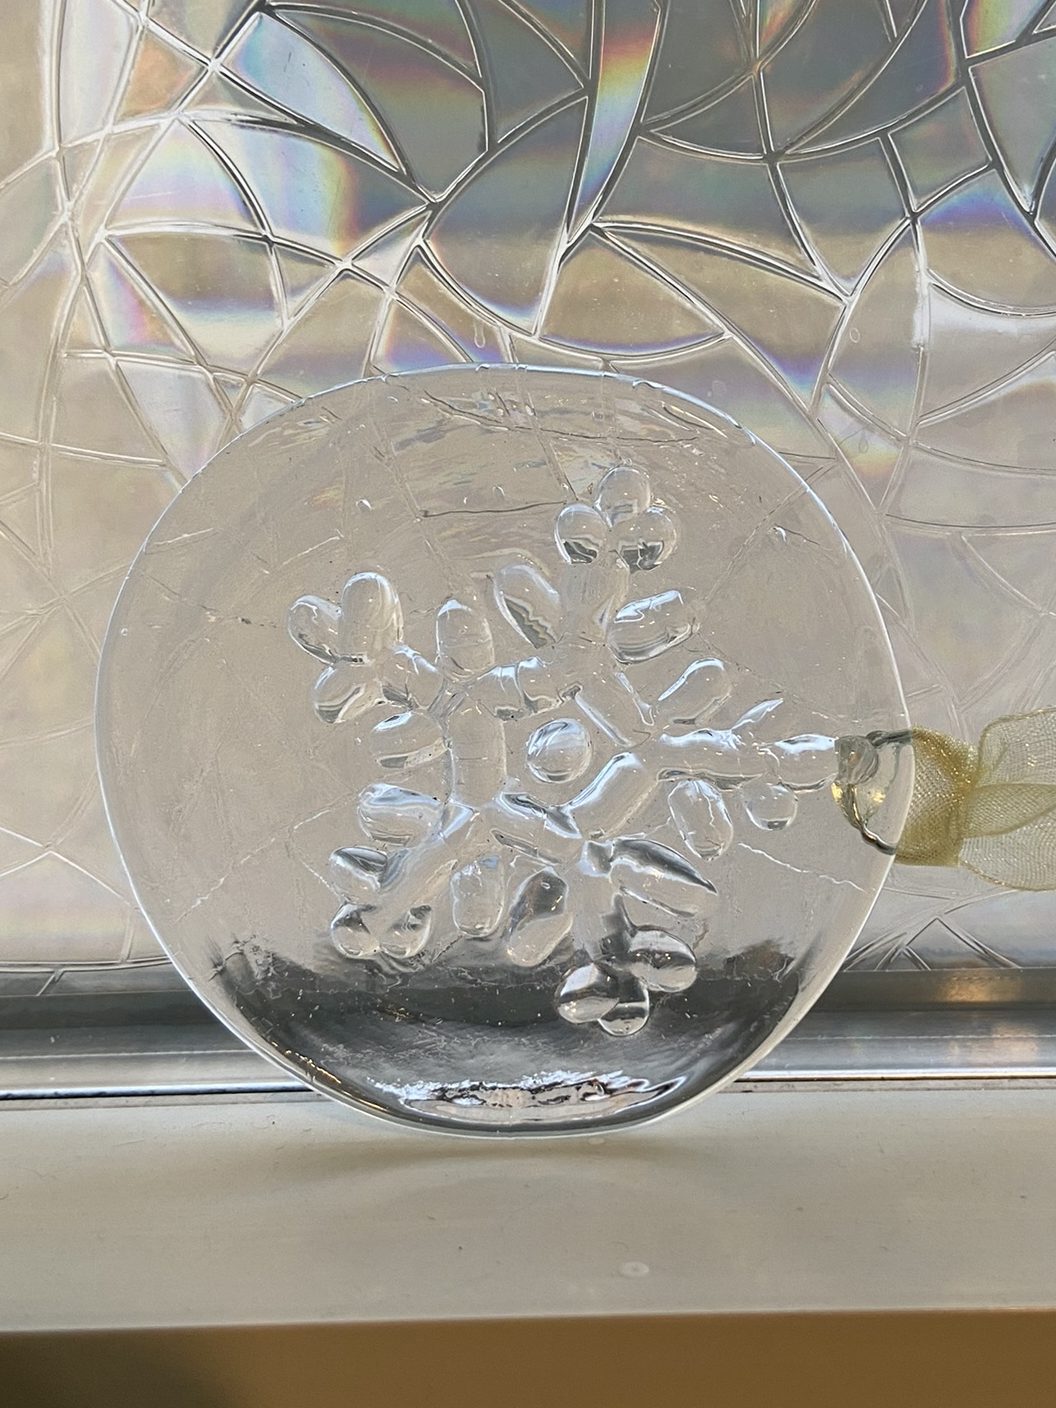 A clear glass disc with a raised snowflake design in front of a window